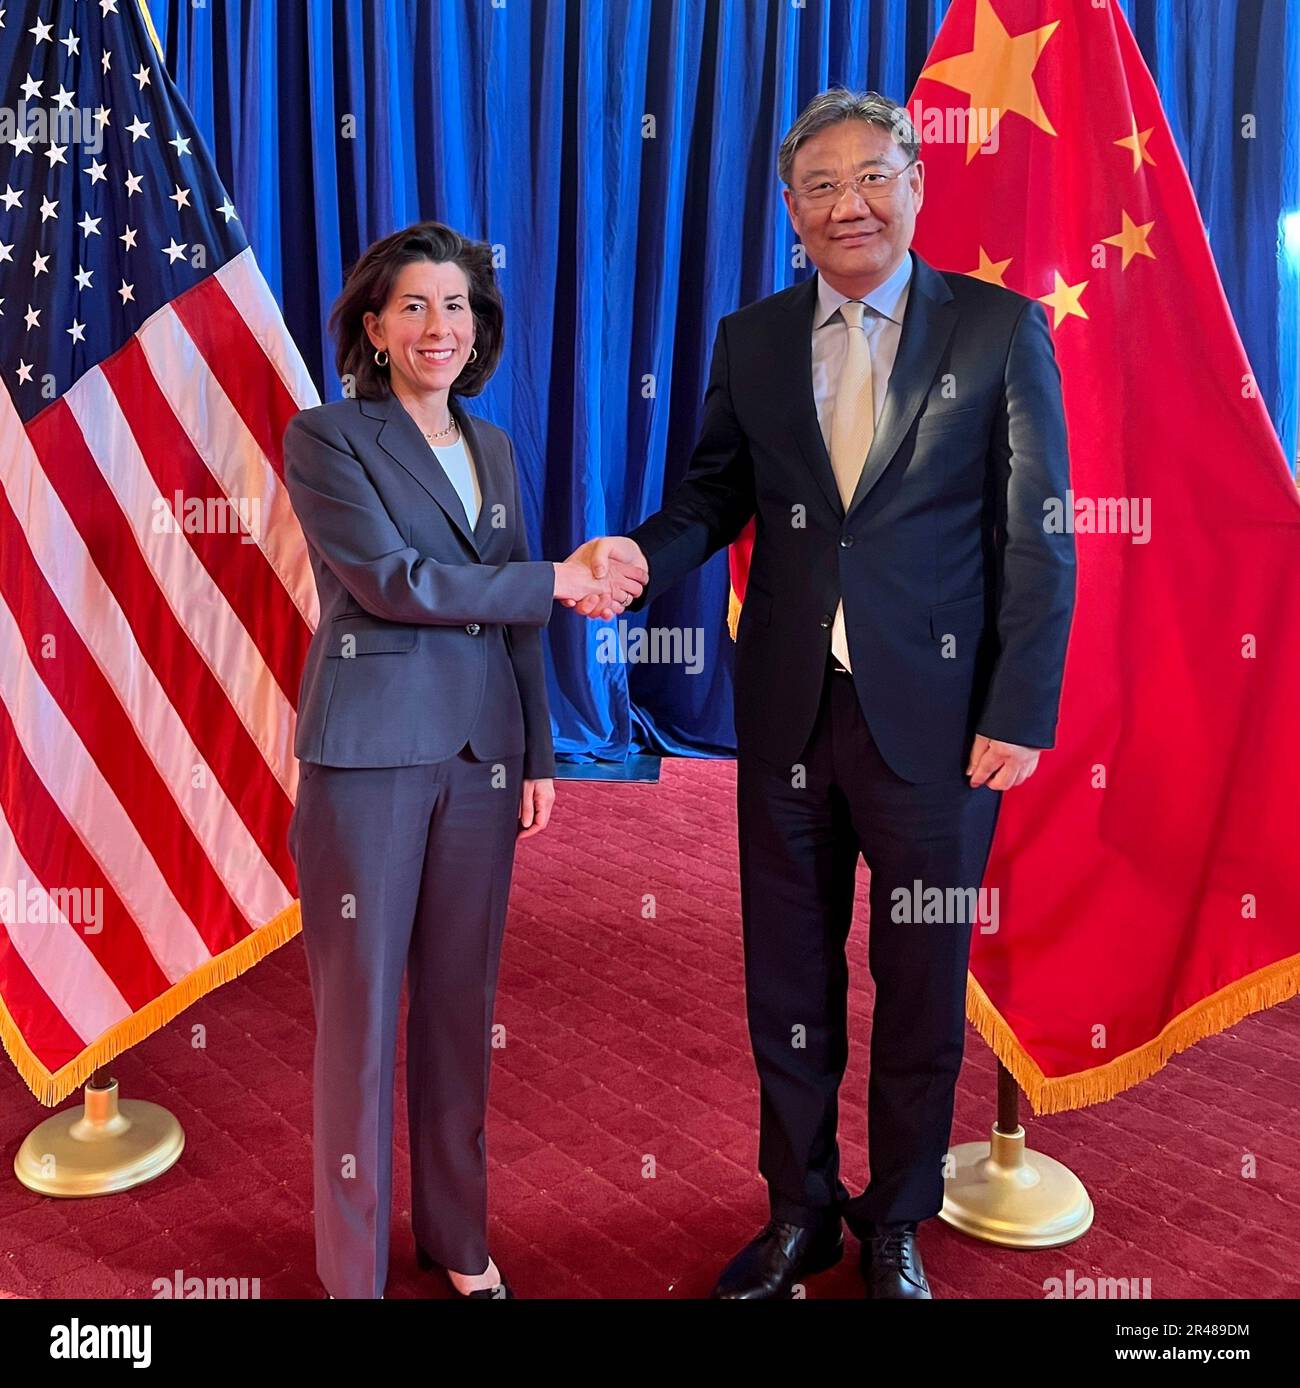 Washington, United States Of America. 26th May, 2023. Washington, United States of America. 26 May, 2023. U.S Commerce Secretary Gina Raimondo, left, welcomes Chinese Minister of Commerce Wang Wentao before the start of a bilateral meeting at the Commerce Department, May 26, 2023 in Washington, DC Credit: Handout/Commerce Department Photo/Alamy Live News Stock Photo